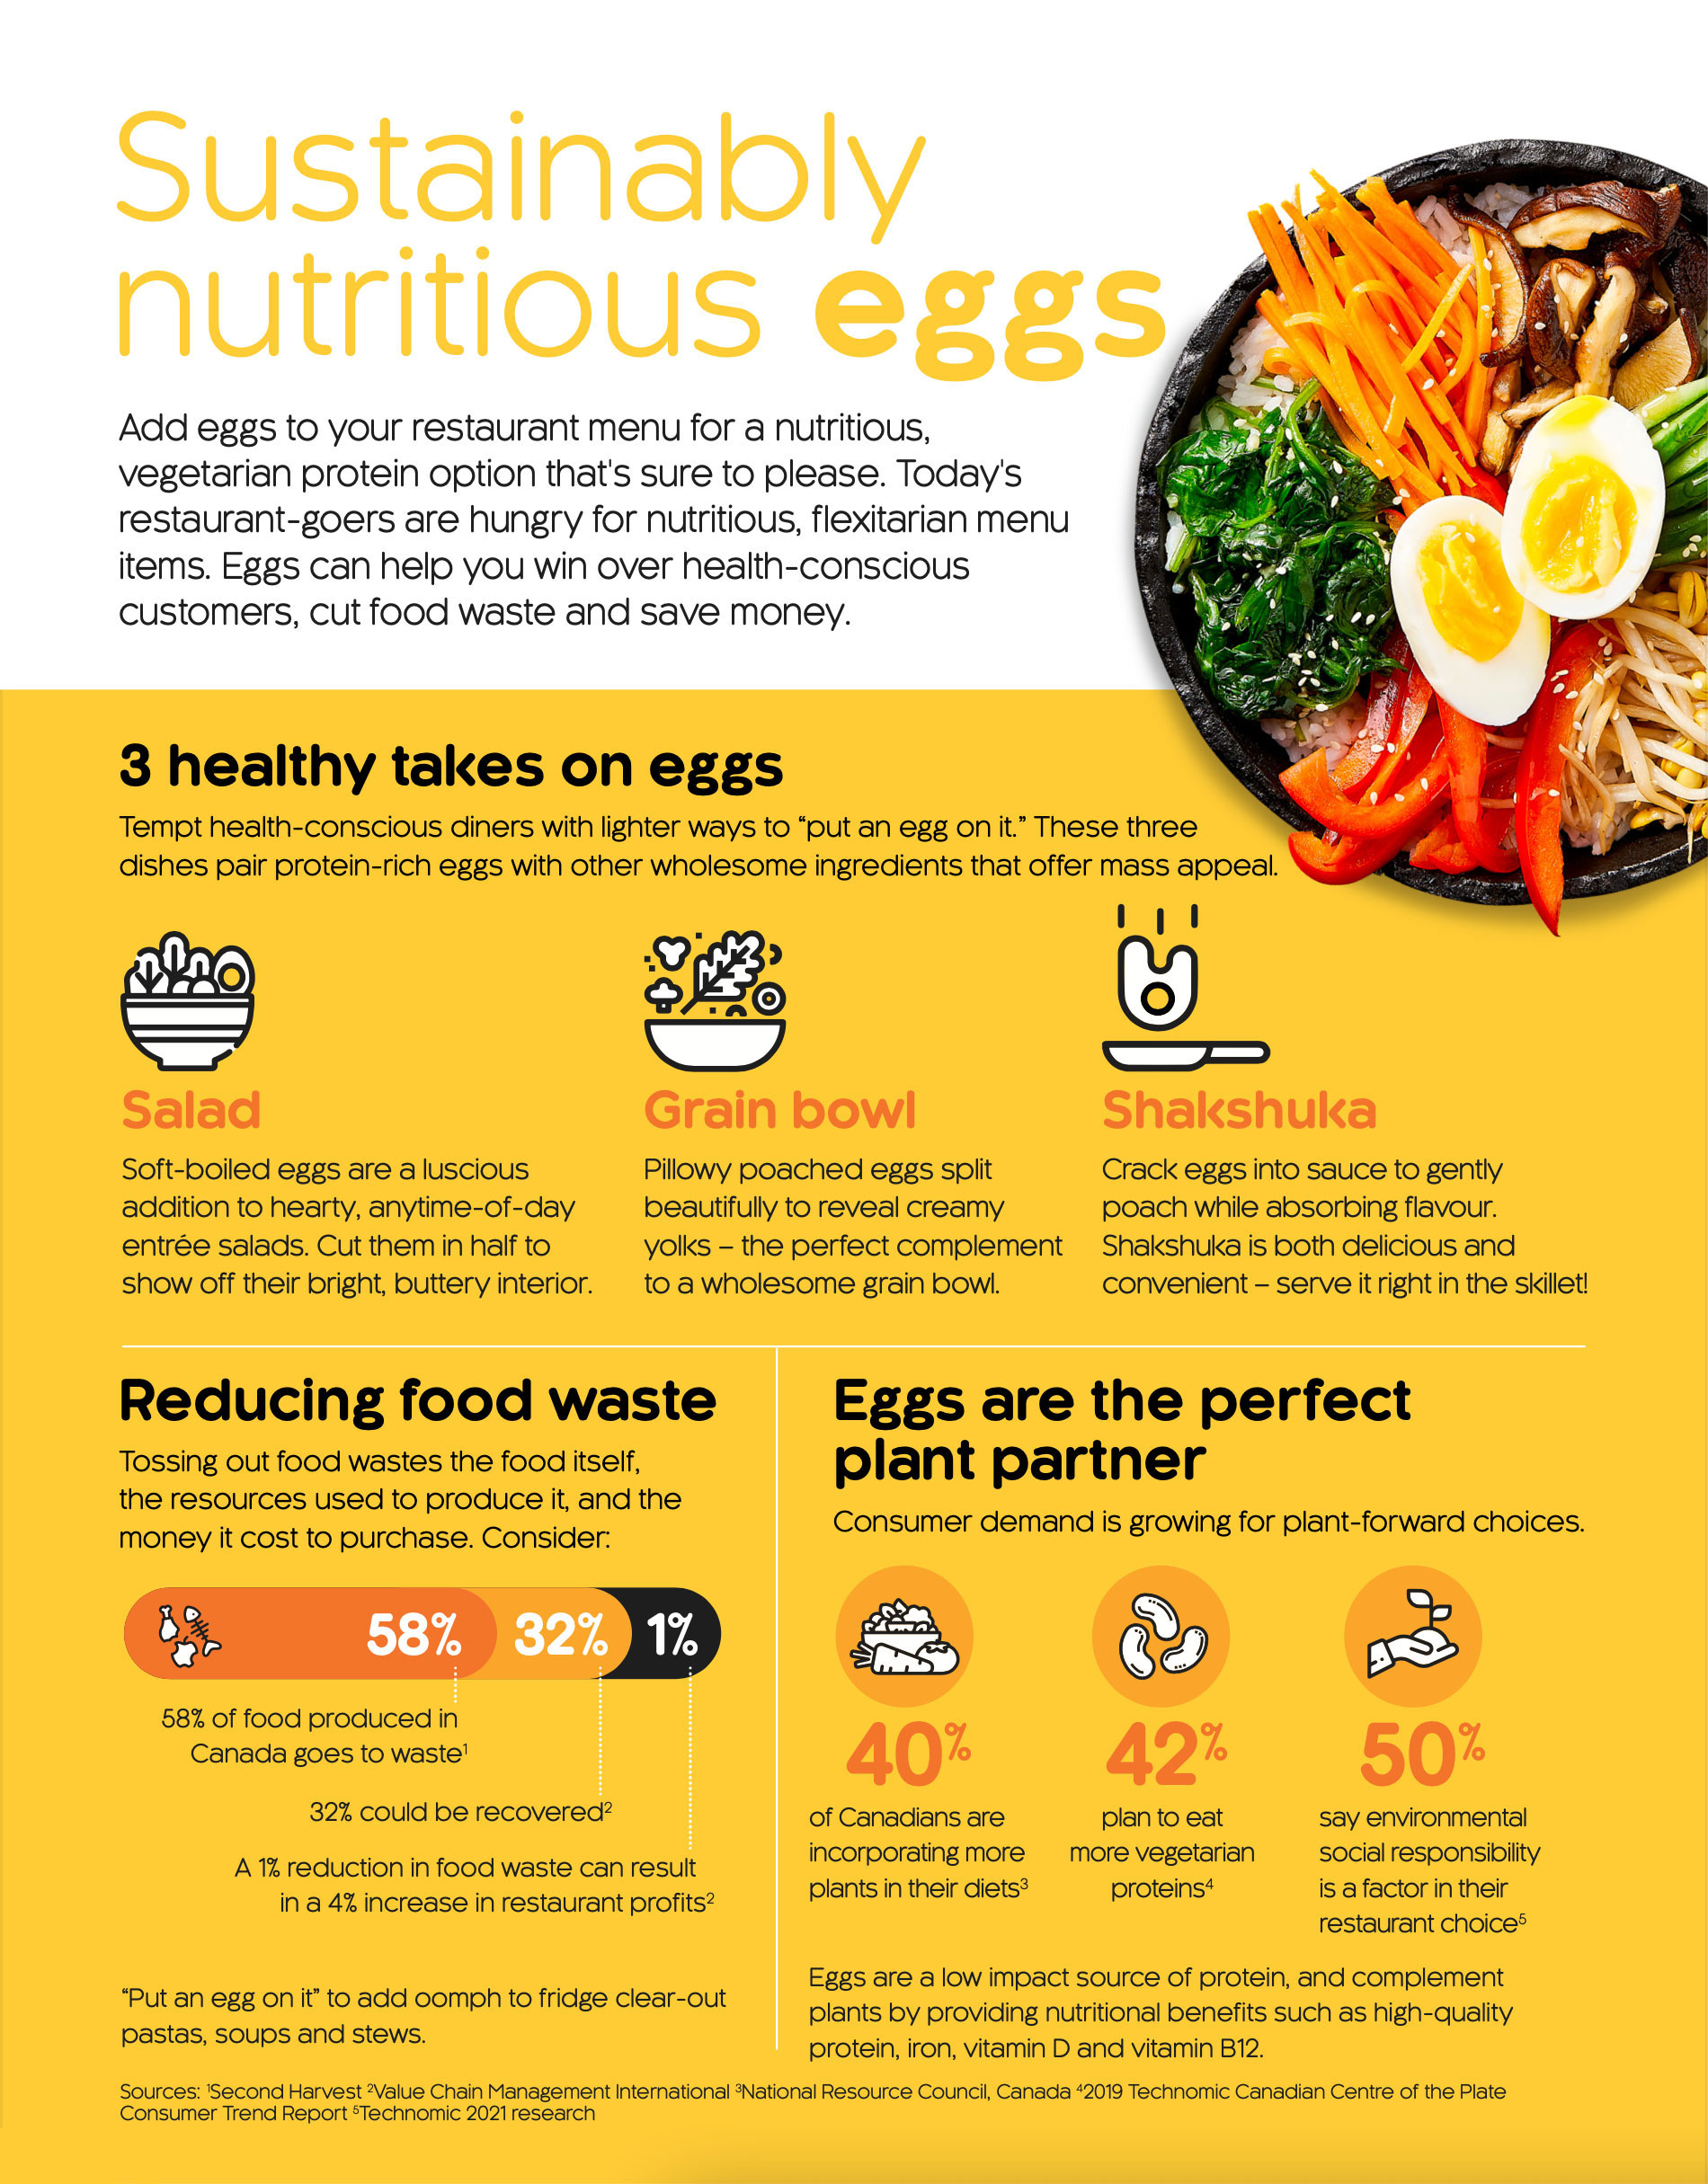 Sustainably nutritious eggs